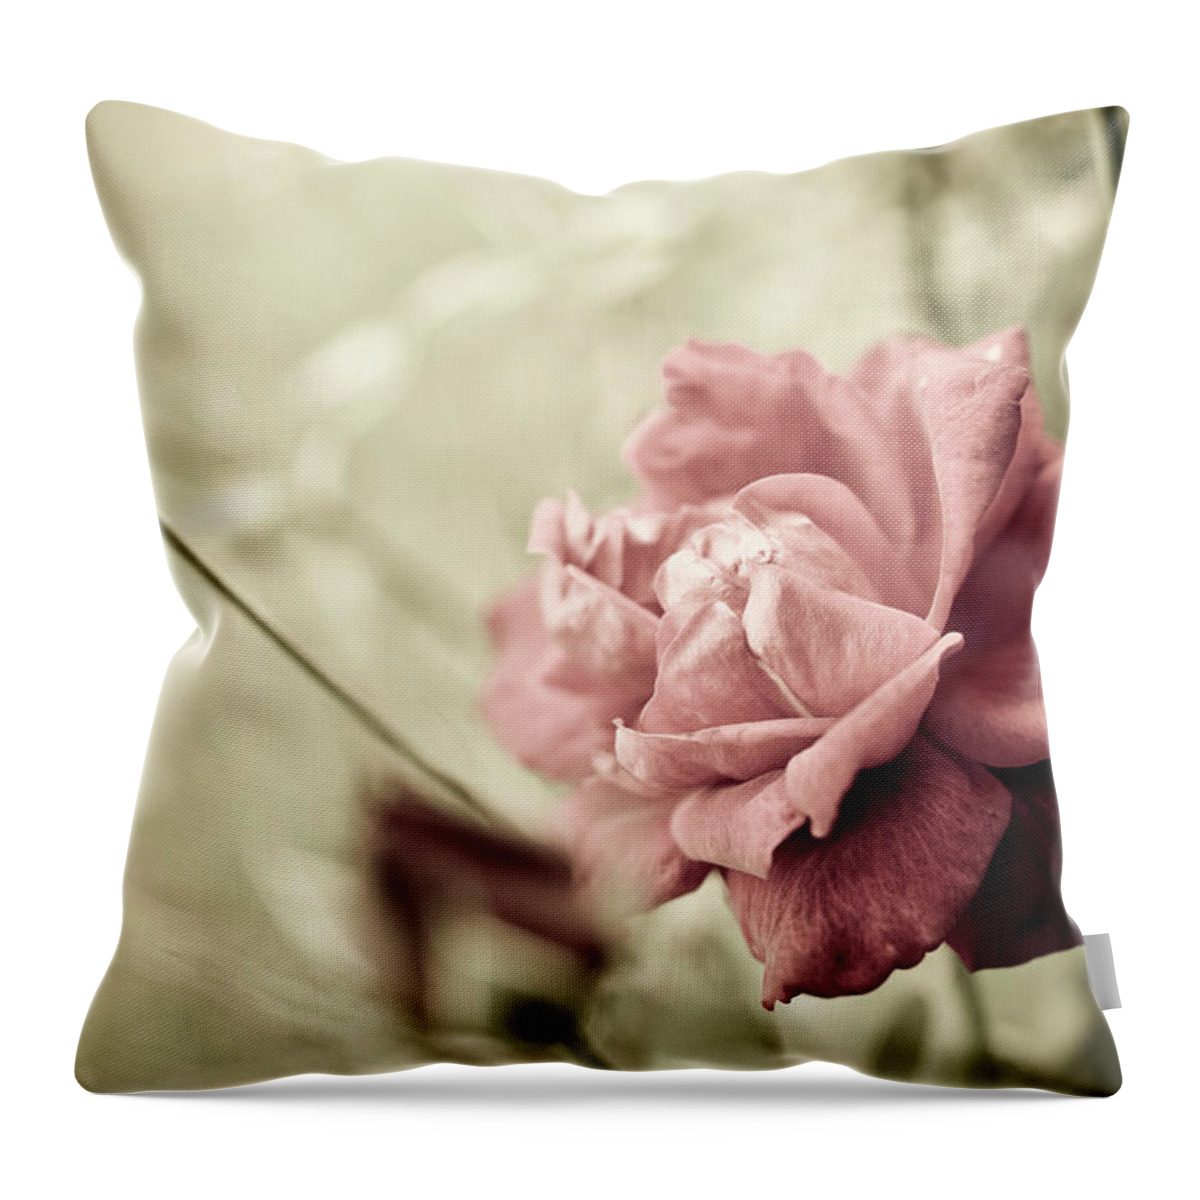 Flowerbed Throw Pillow featuring the photograph Flower In The Garden by Michellegibson